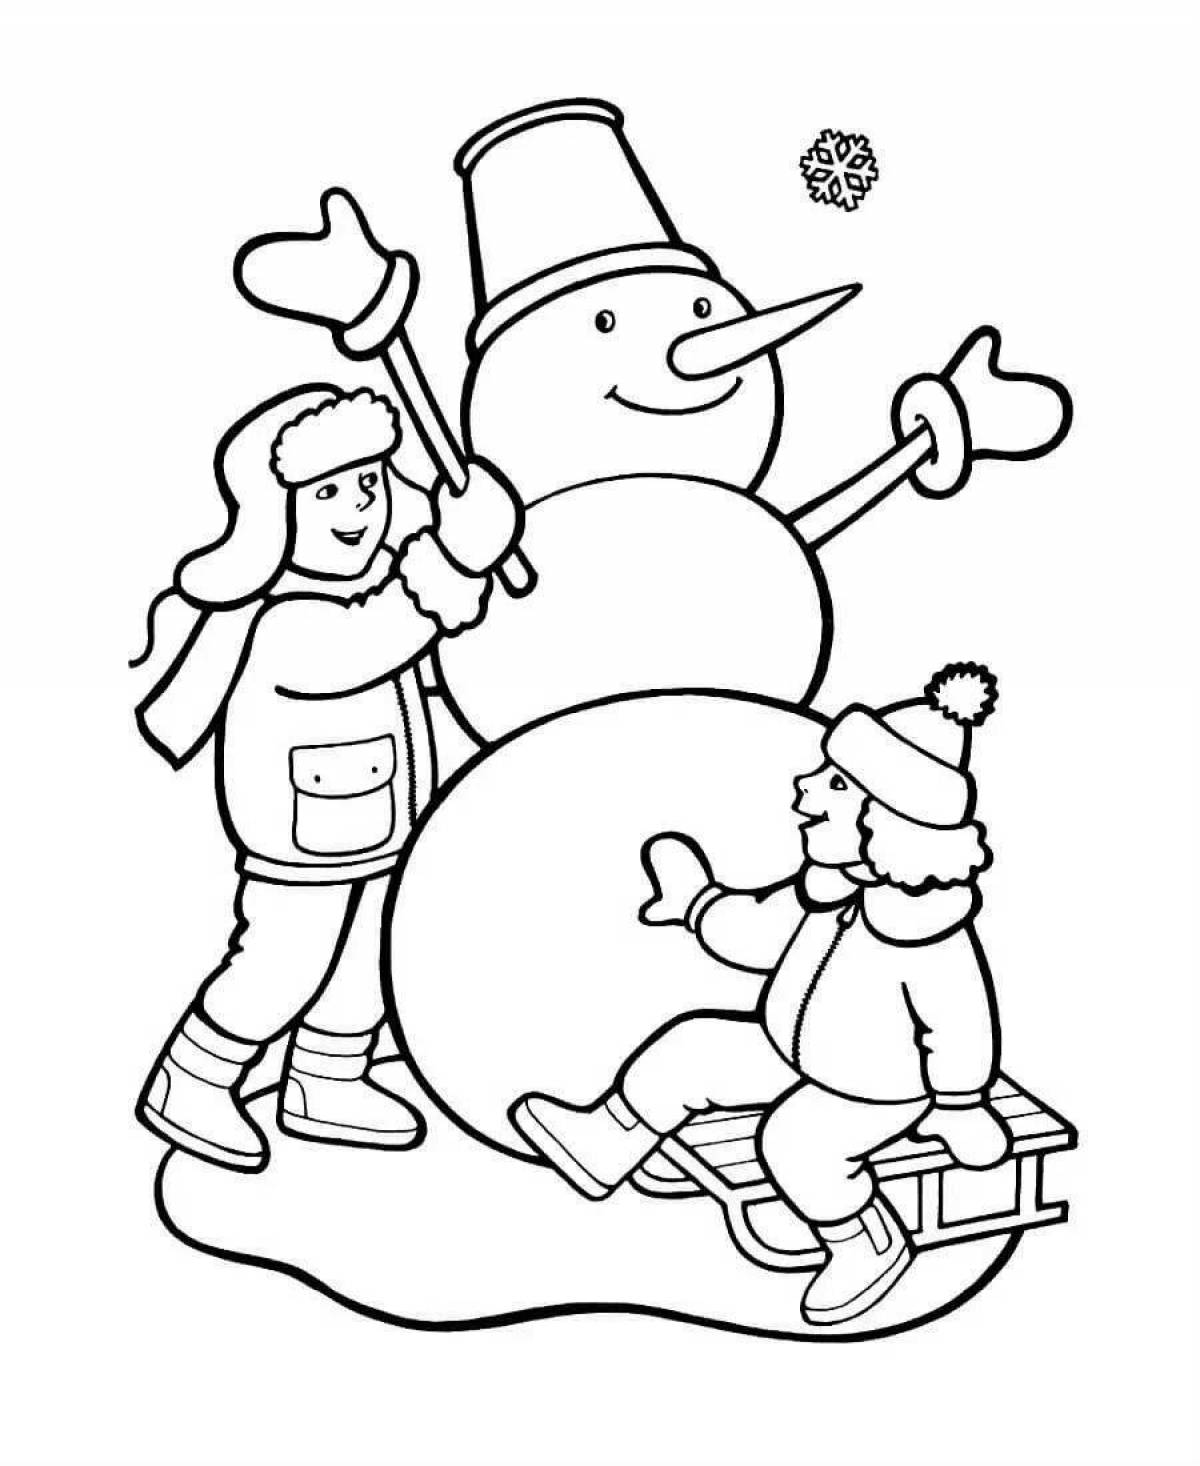 Animated Christmas funny coloring book